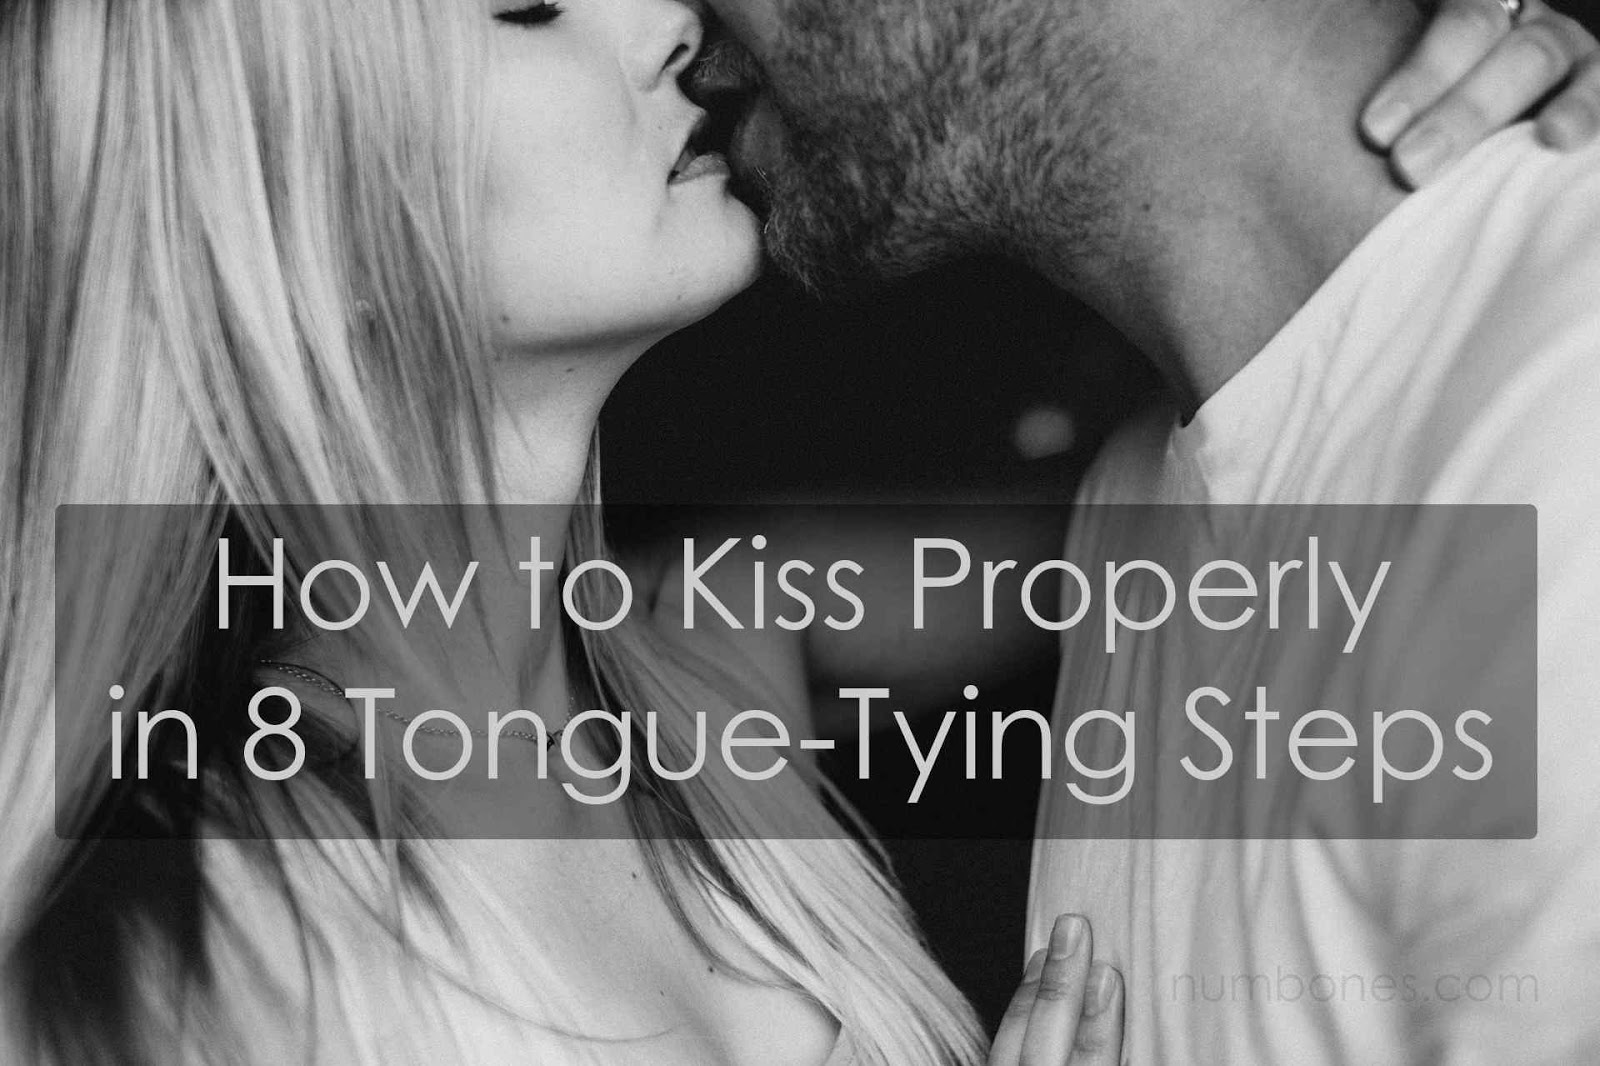 How to lip kiss properly